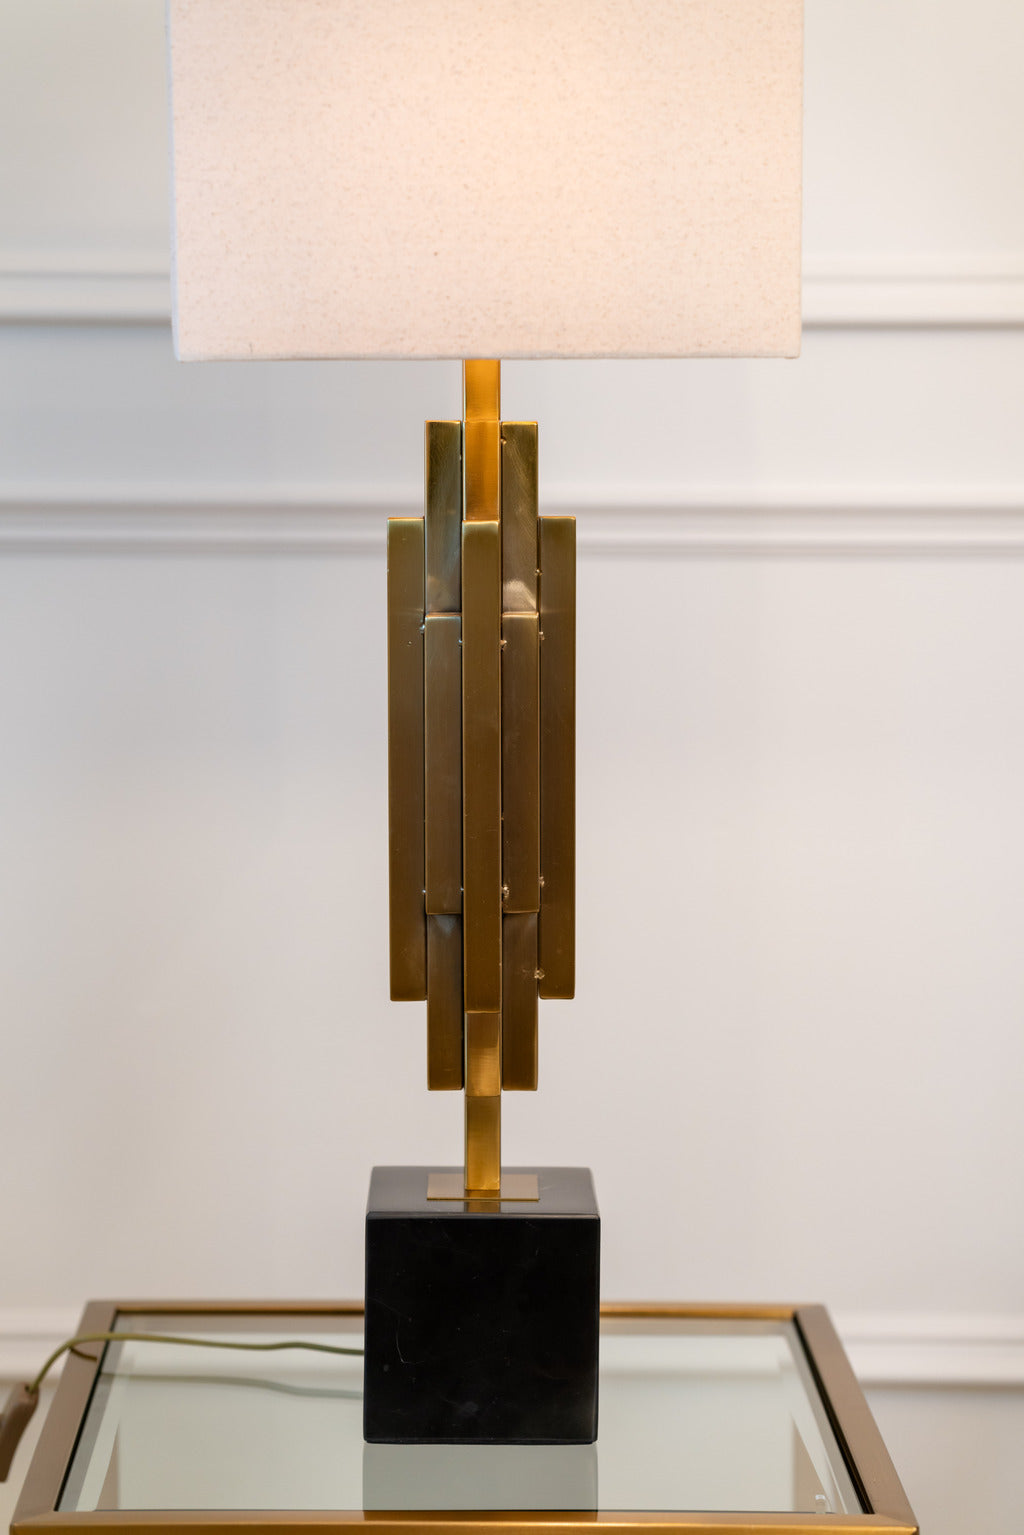 Black and gold laps, table lamps, gold lamps, gold table lamps, statement lamps, blush lampshade, lighting, furniture, decor